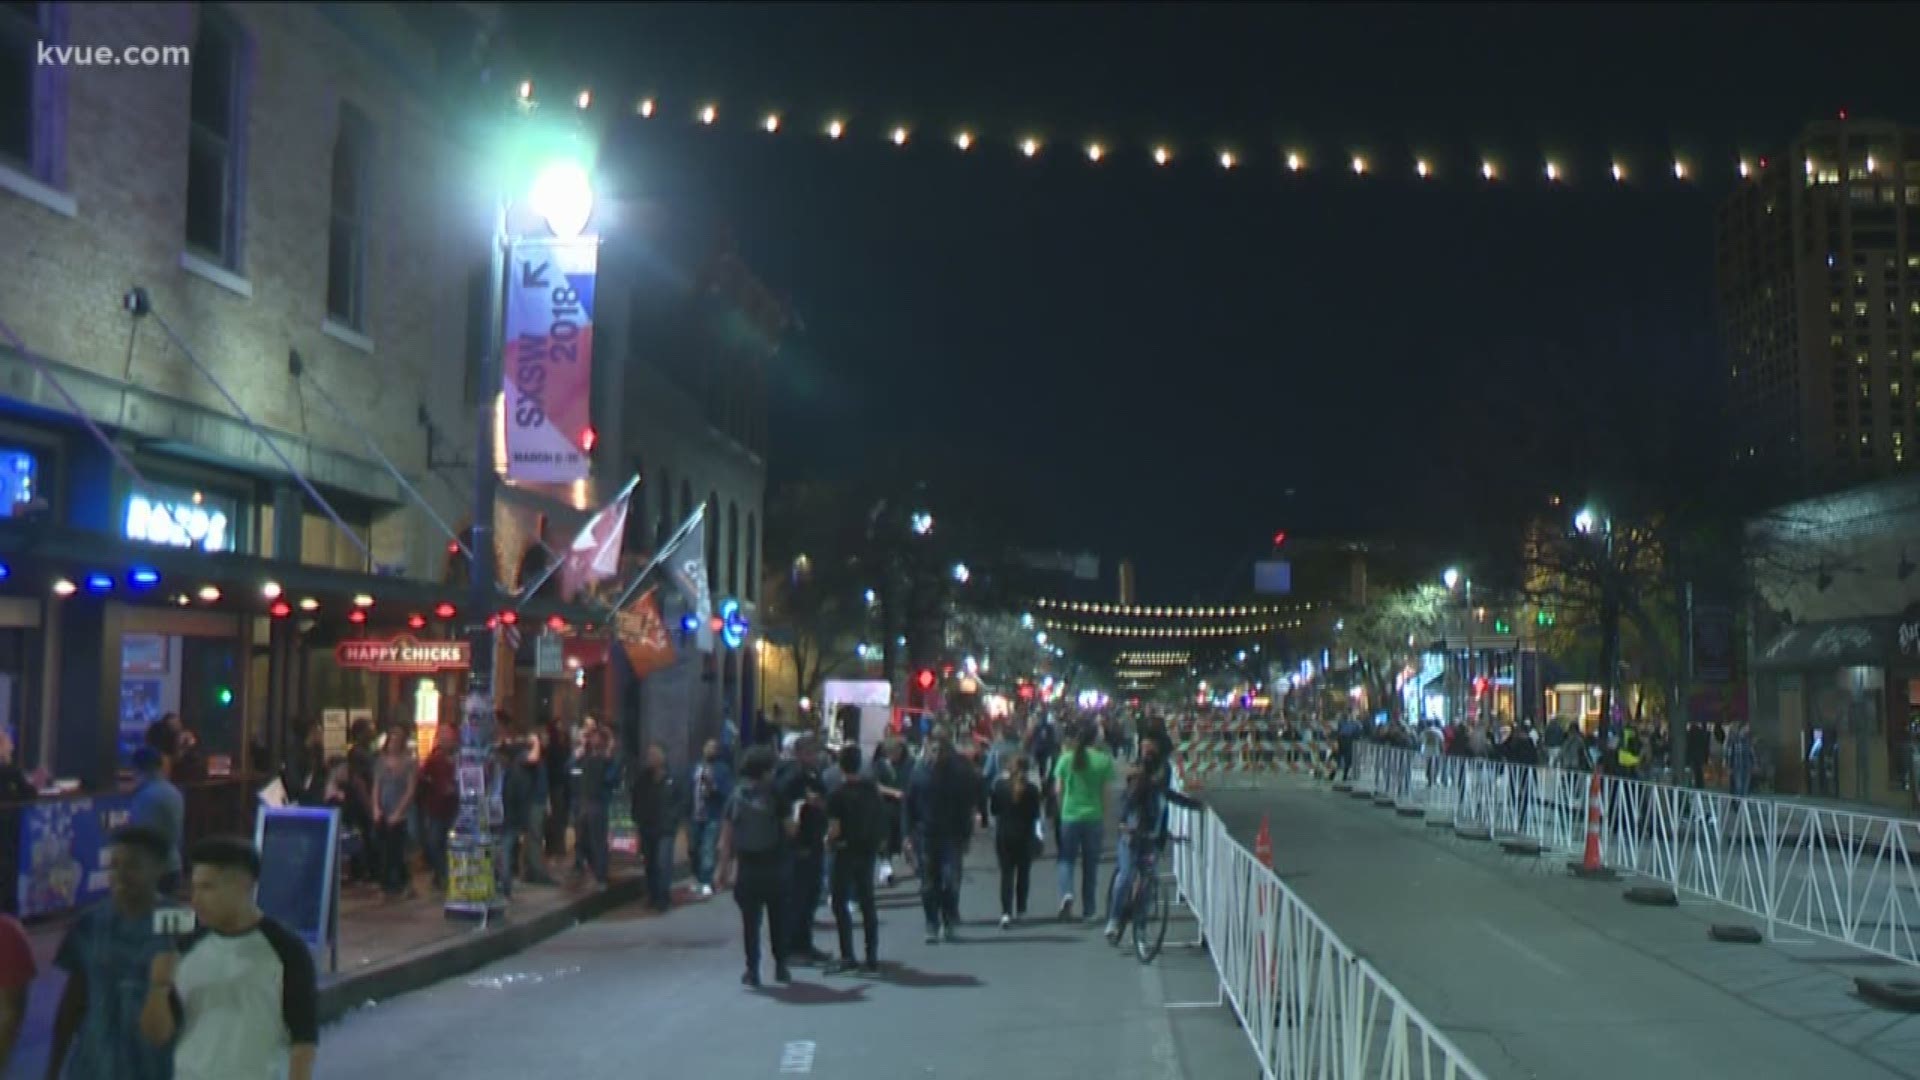 Jenni Lee spoke to a consulting firm that has analyzed the festival's economic impact for the past several years.